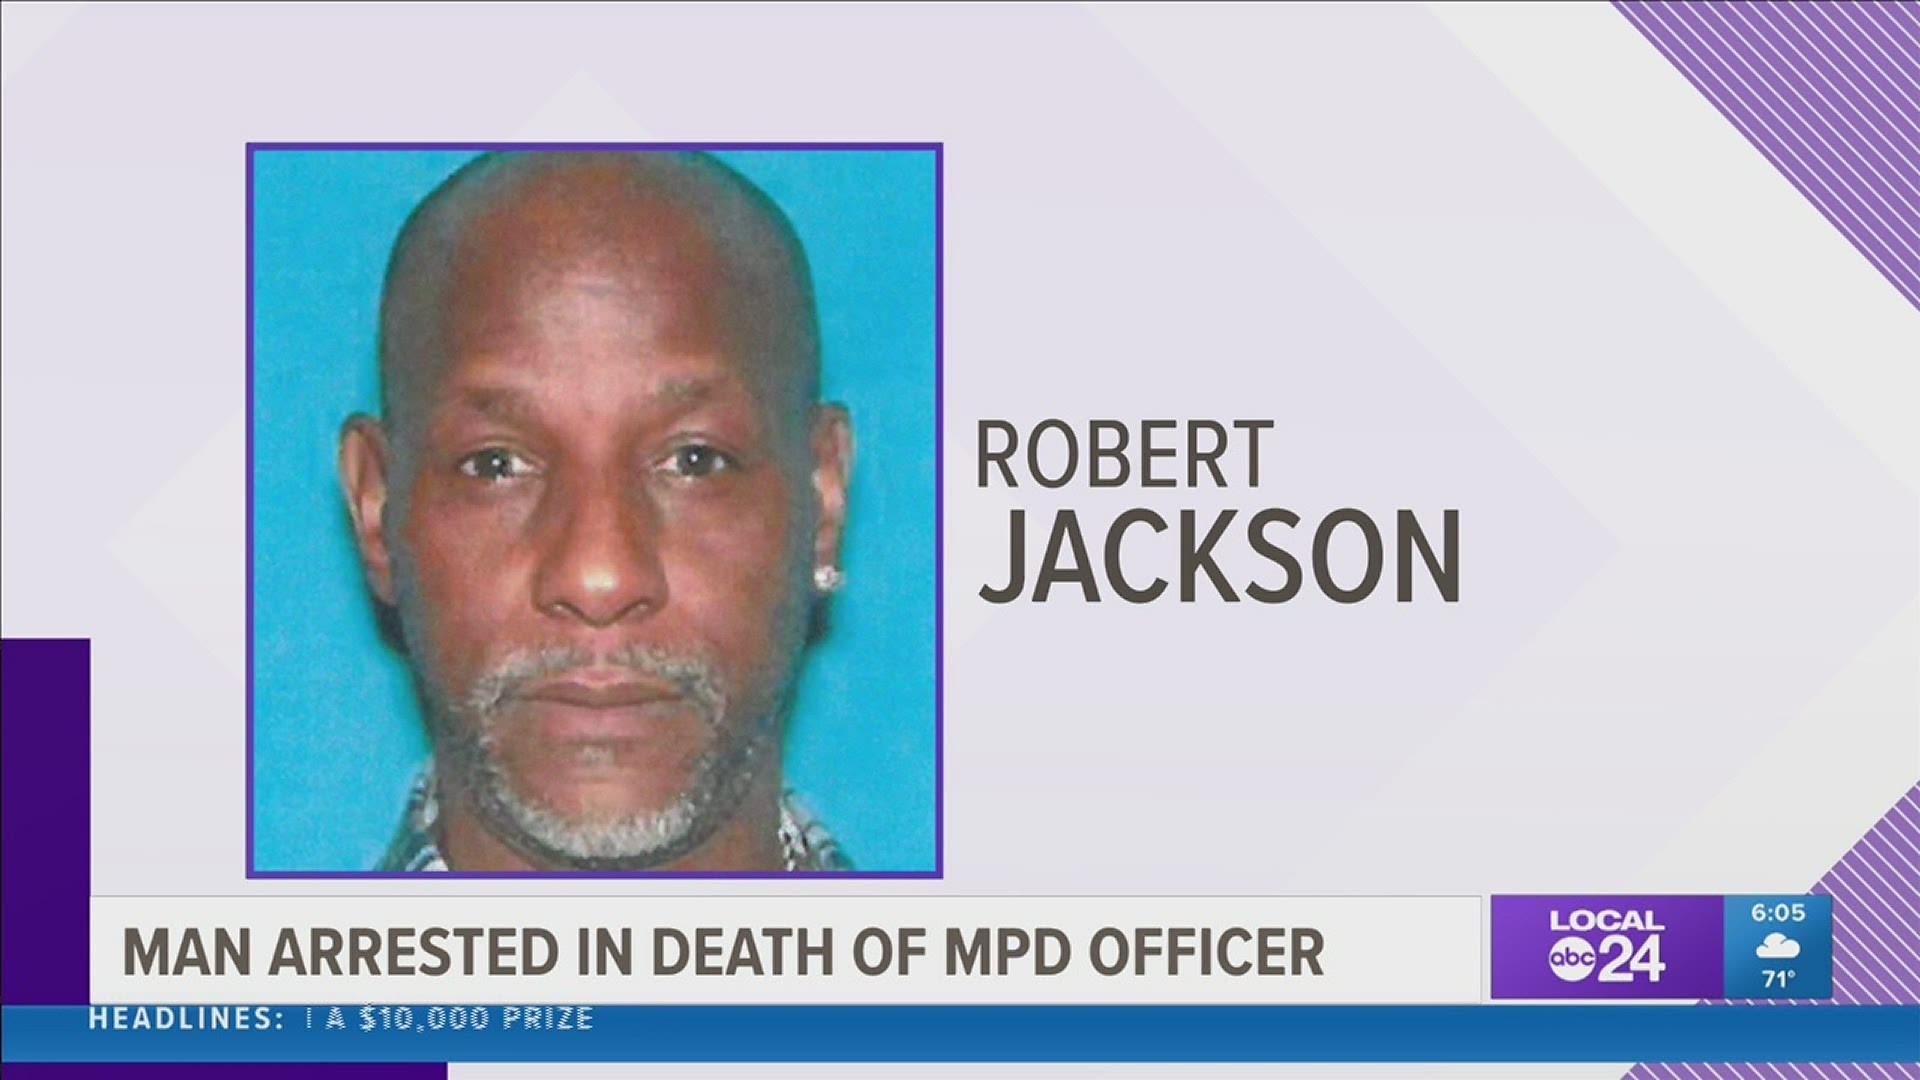 54-year-old Robert Earl Jackson is accused of drunk driving in the death of 31-year-old MPD Officer Nicholas Blow, who died in the crash Monday night.